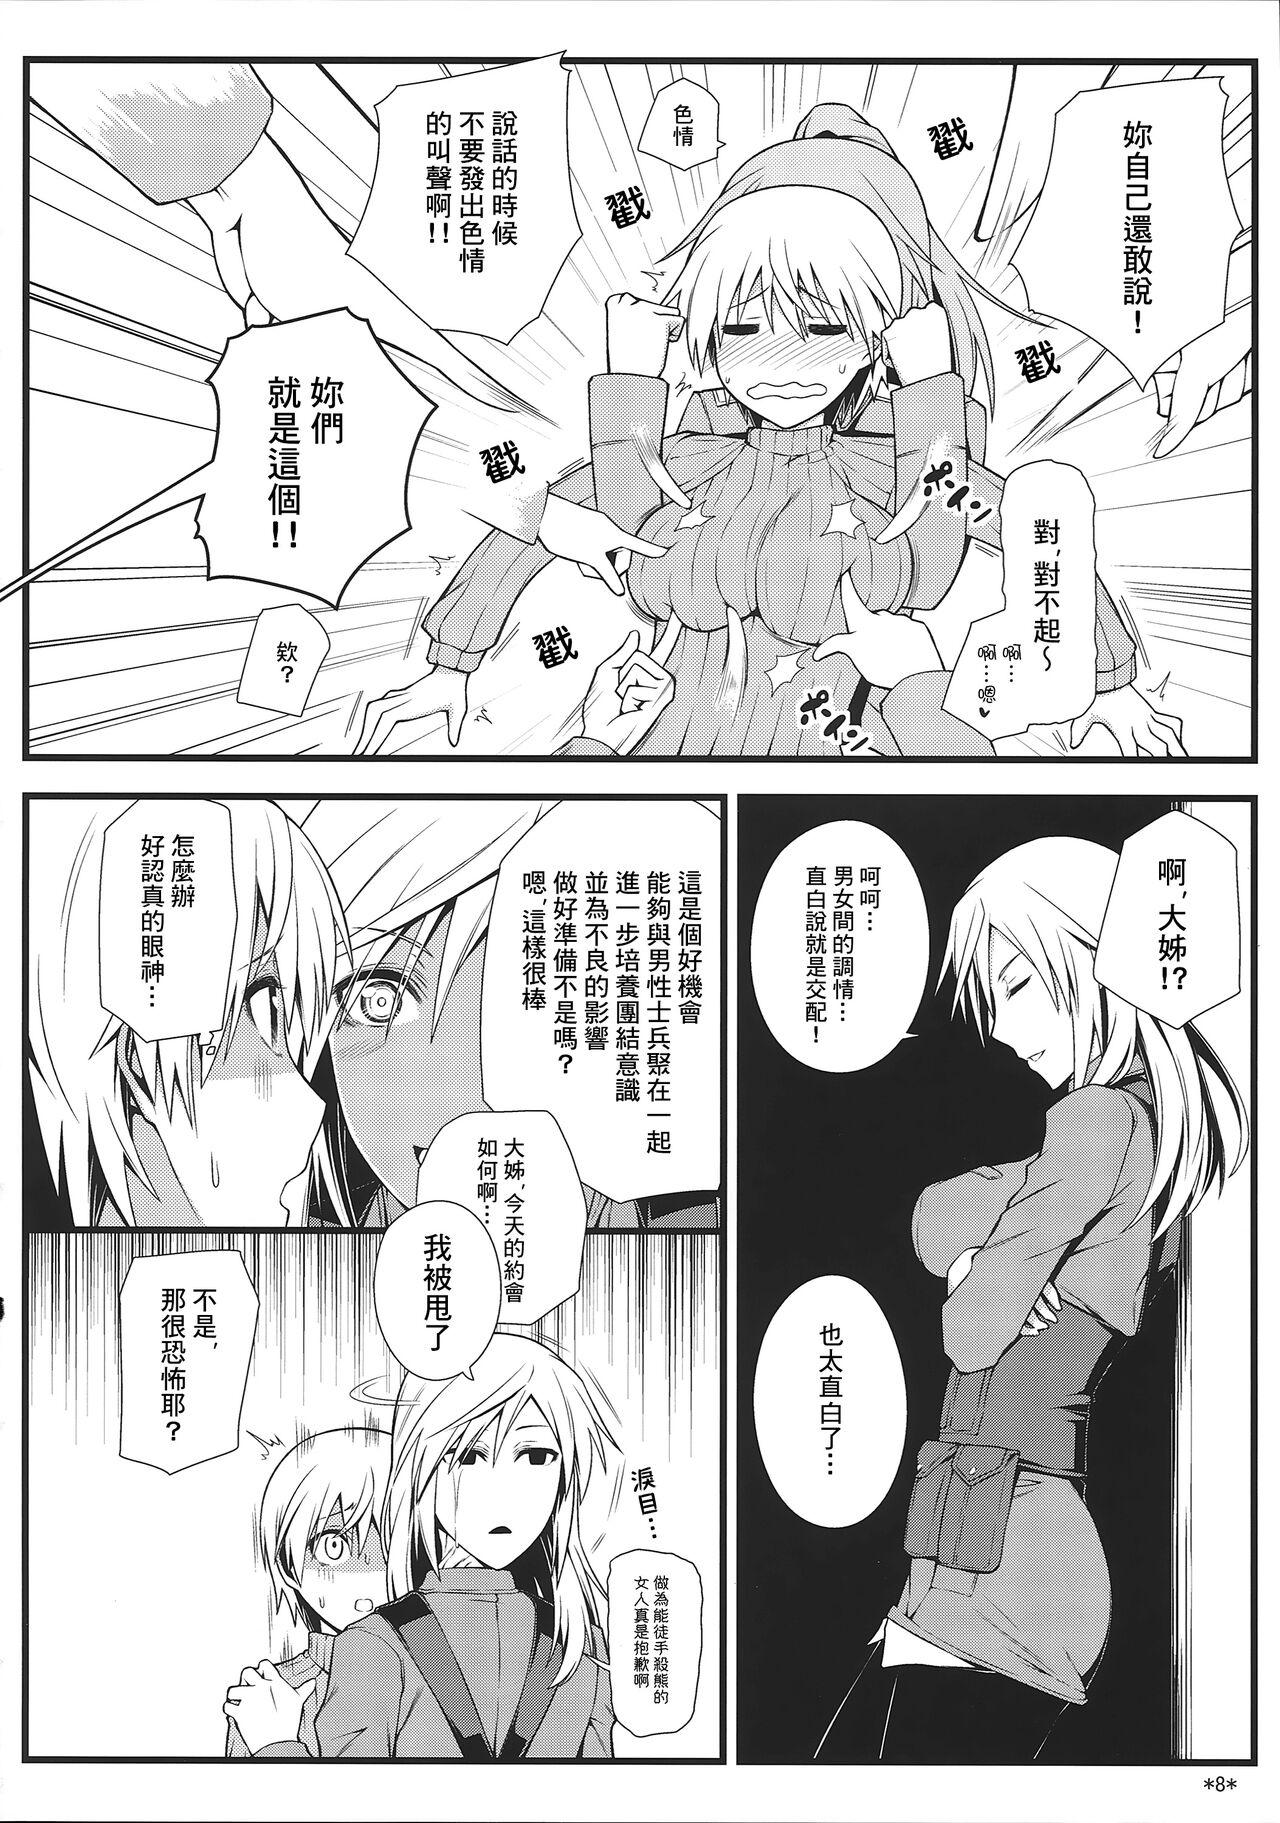 Camwhore KARLSLAND SYNDROME 3 - Strike witches Online - Page 10